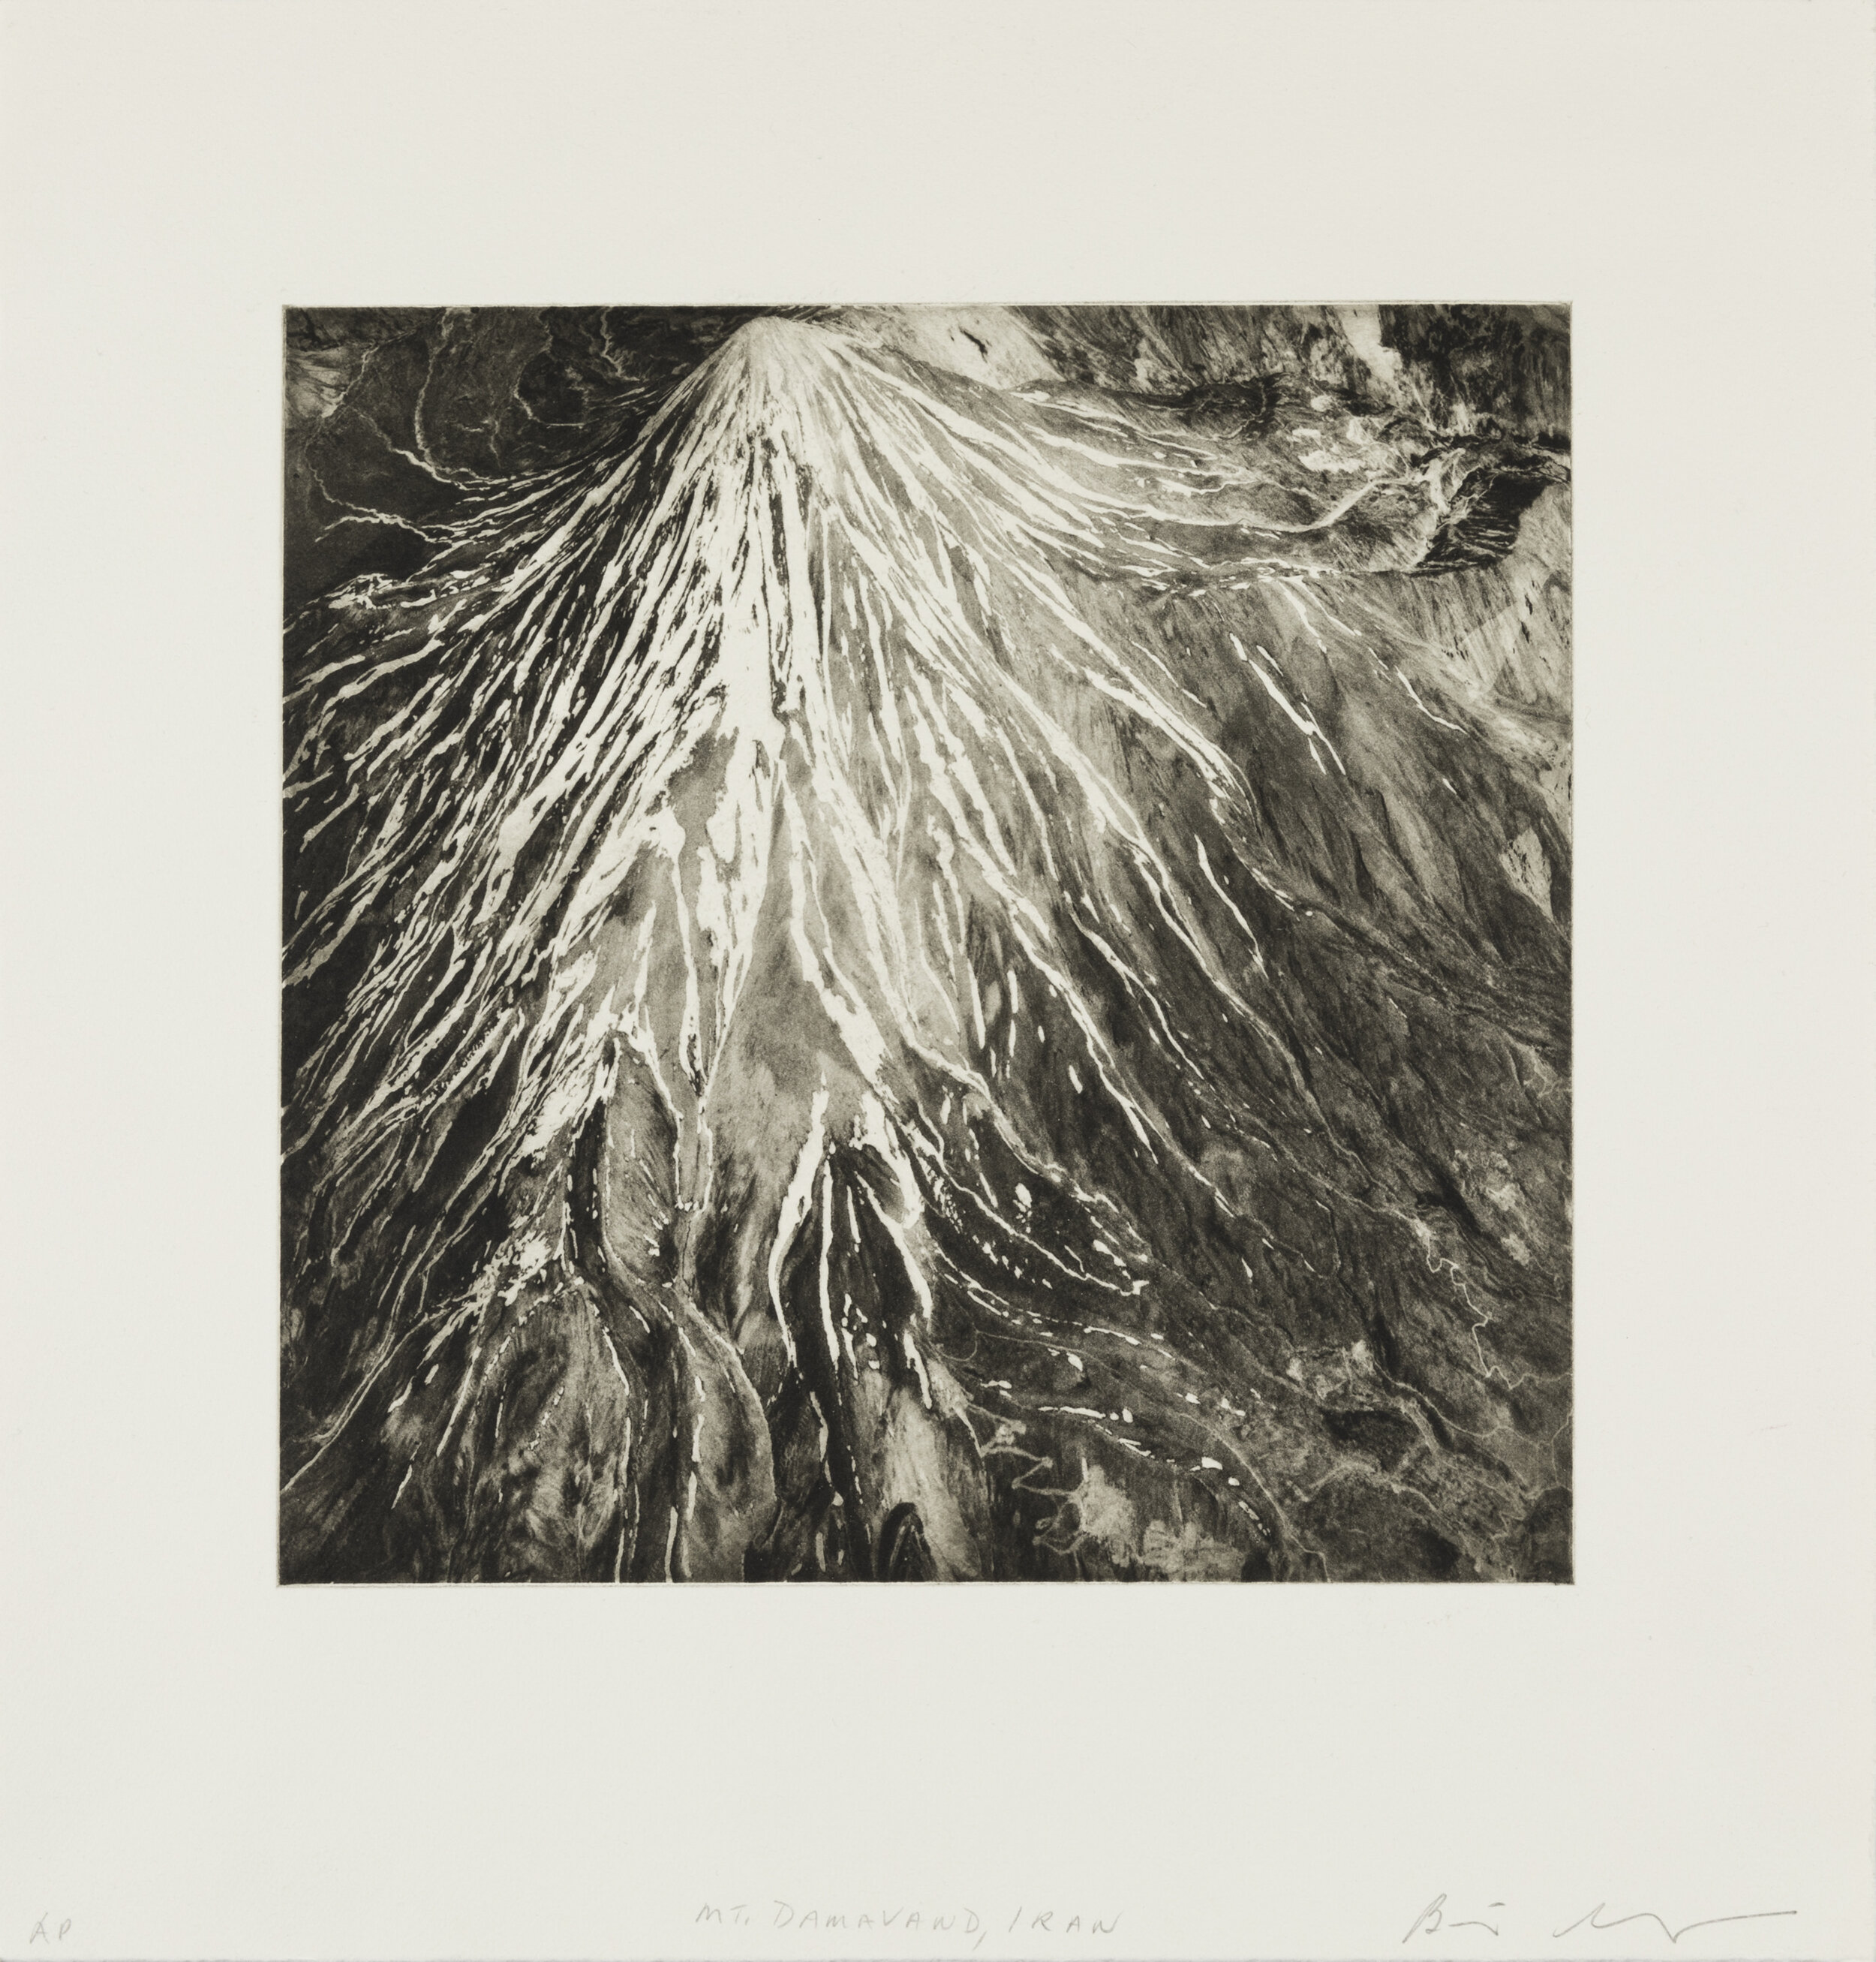    Mount Damavand, Iran, 2019     Copperplate photogravure etching on cotton rag paper, plate size; 10.6” x 10.6”, paper size; 16” x 15.5”, edition 10  